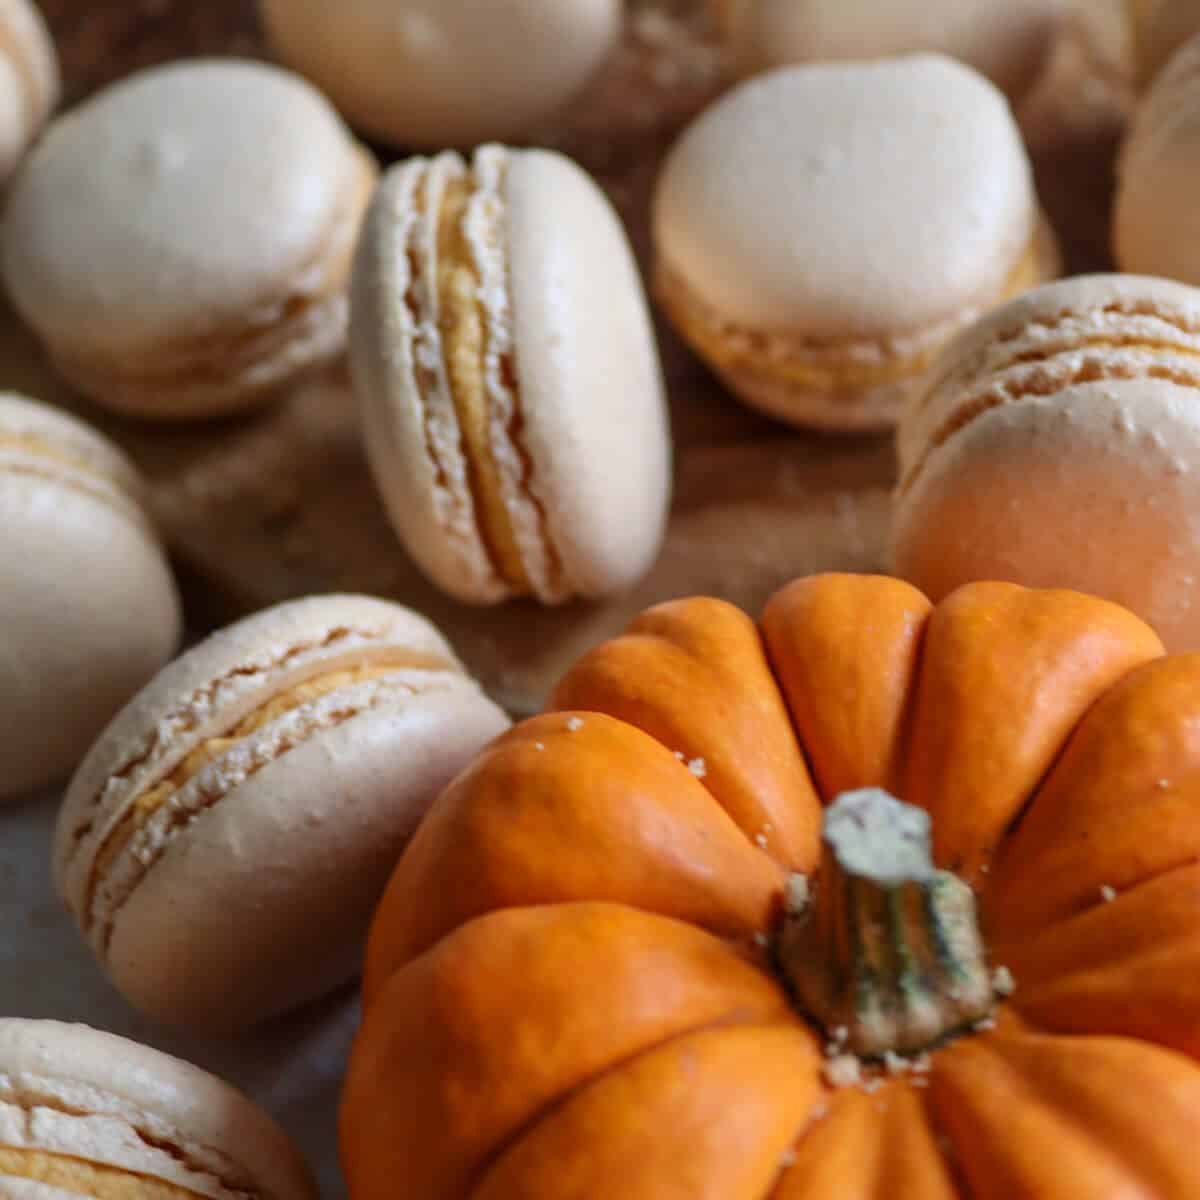 Pumpkin cheesecake fall macarons on their sides showing their filling.